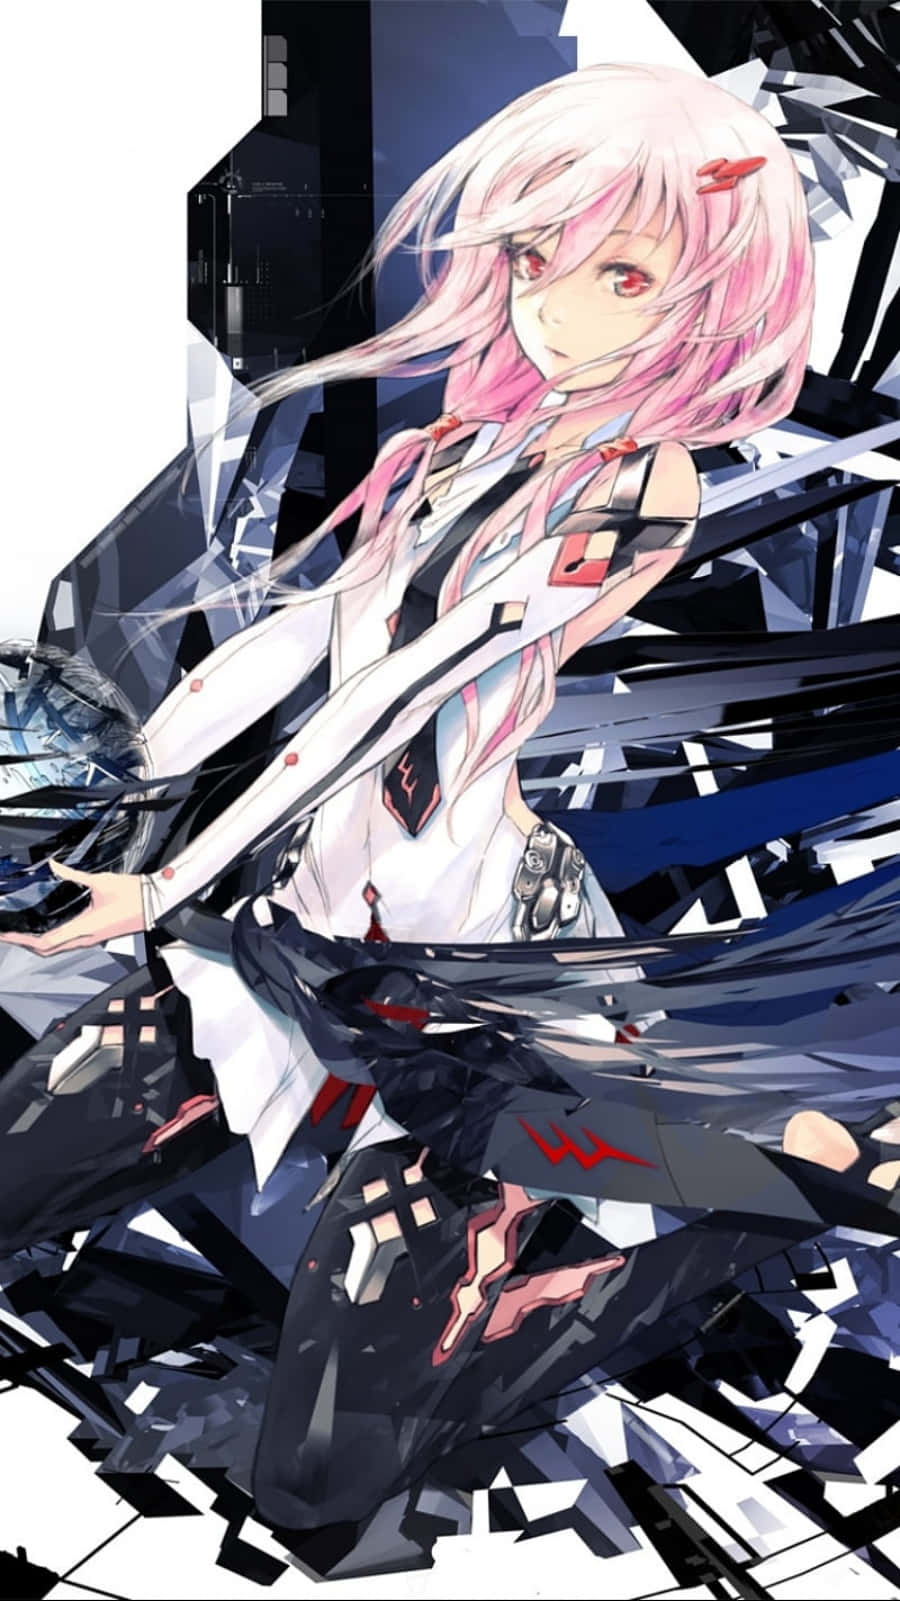 a glimpse of the post-apocalyptic world of Guilty Crown